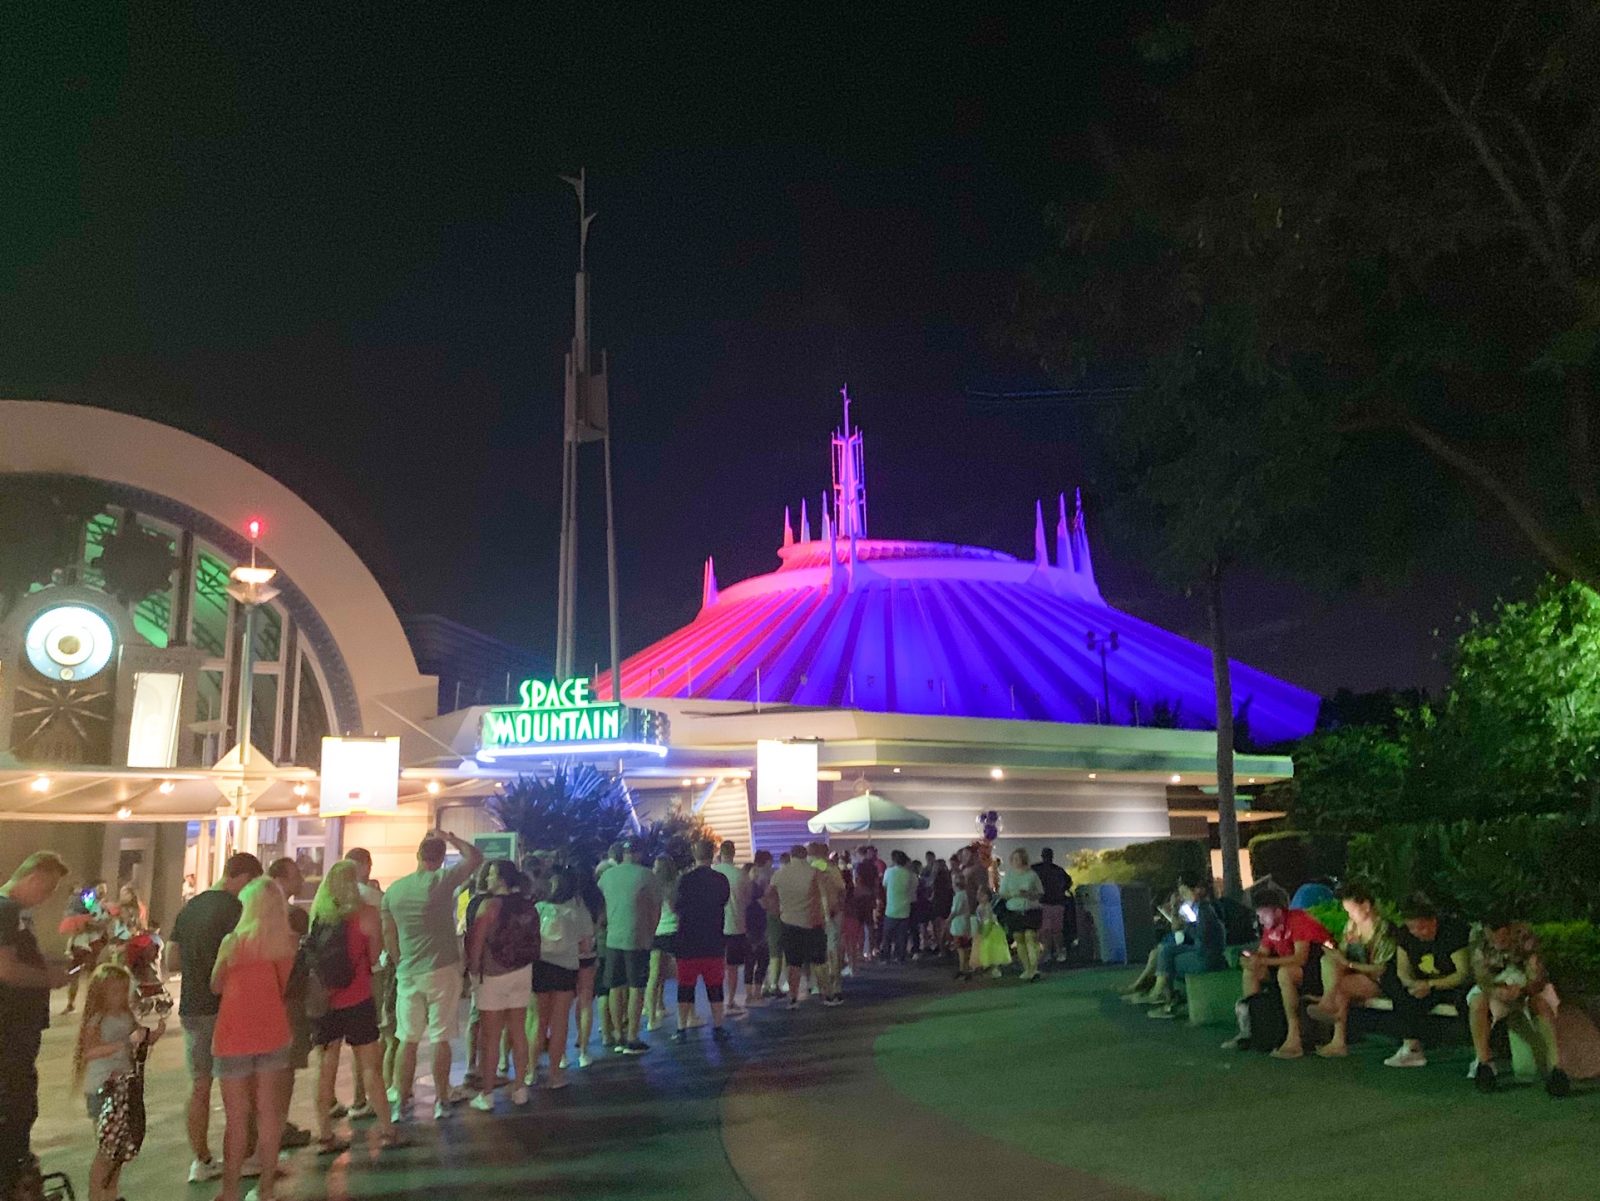 outside view of a line in front of Space Mountain at night